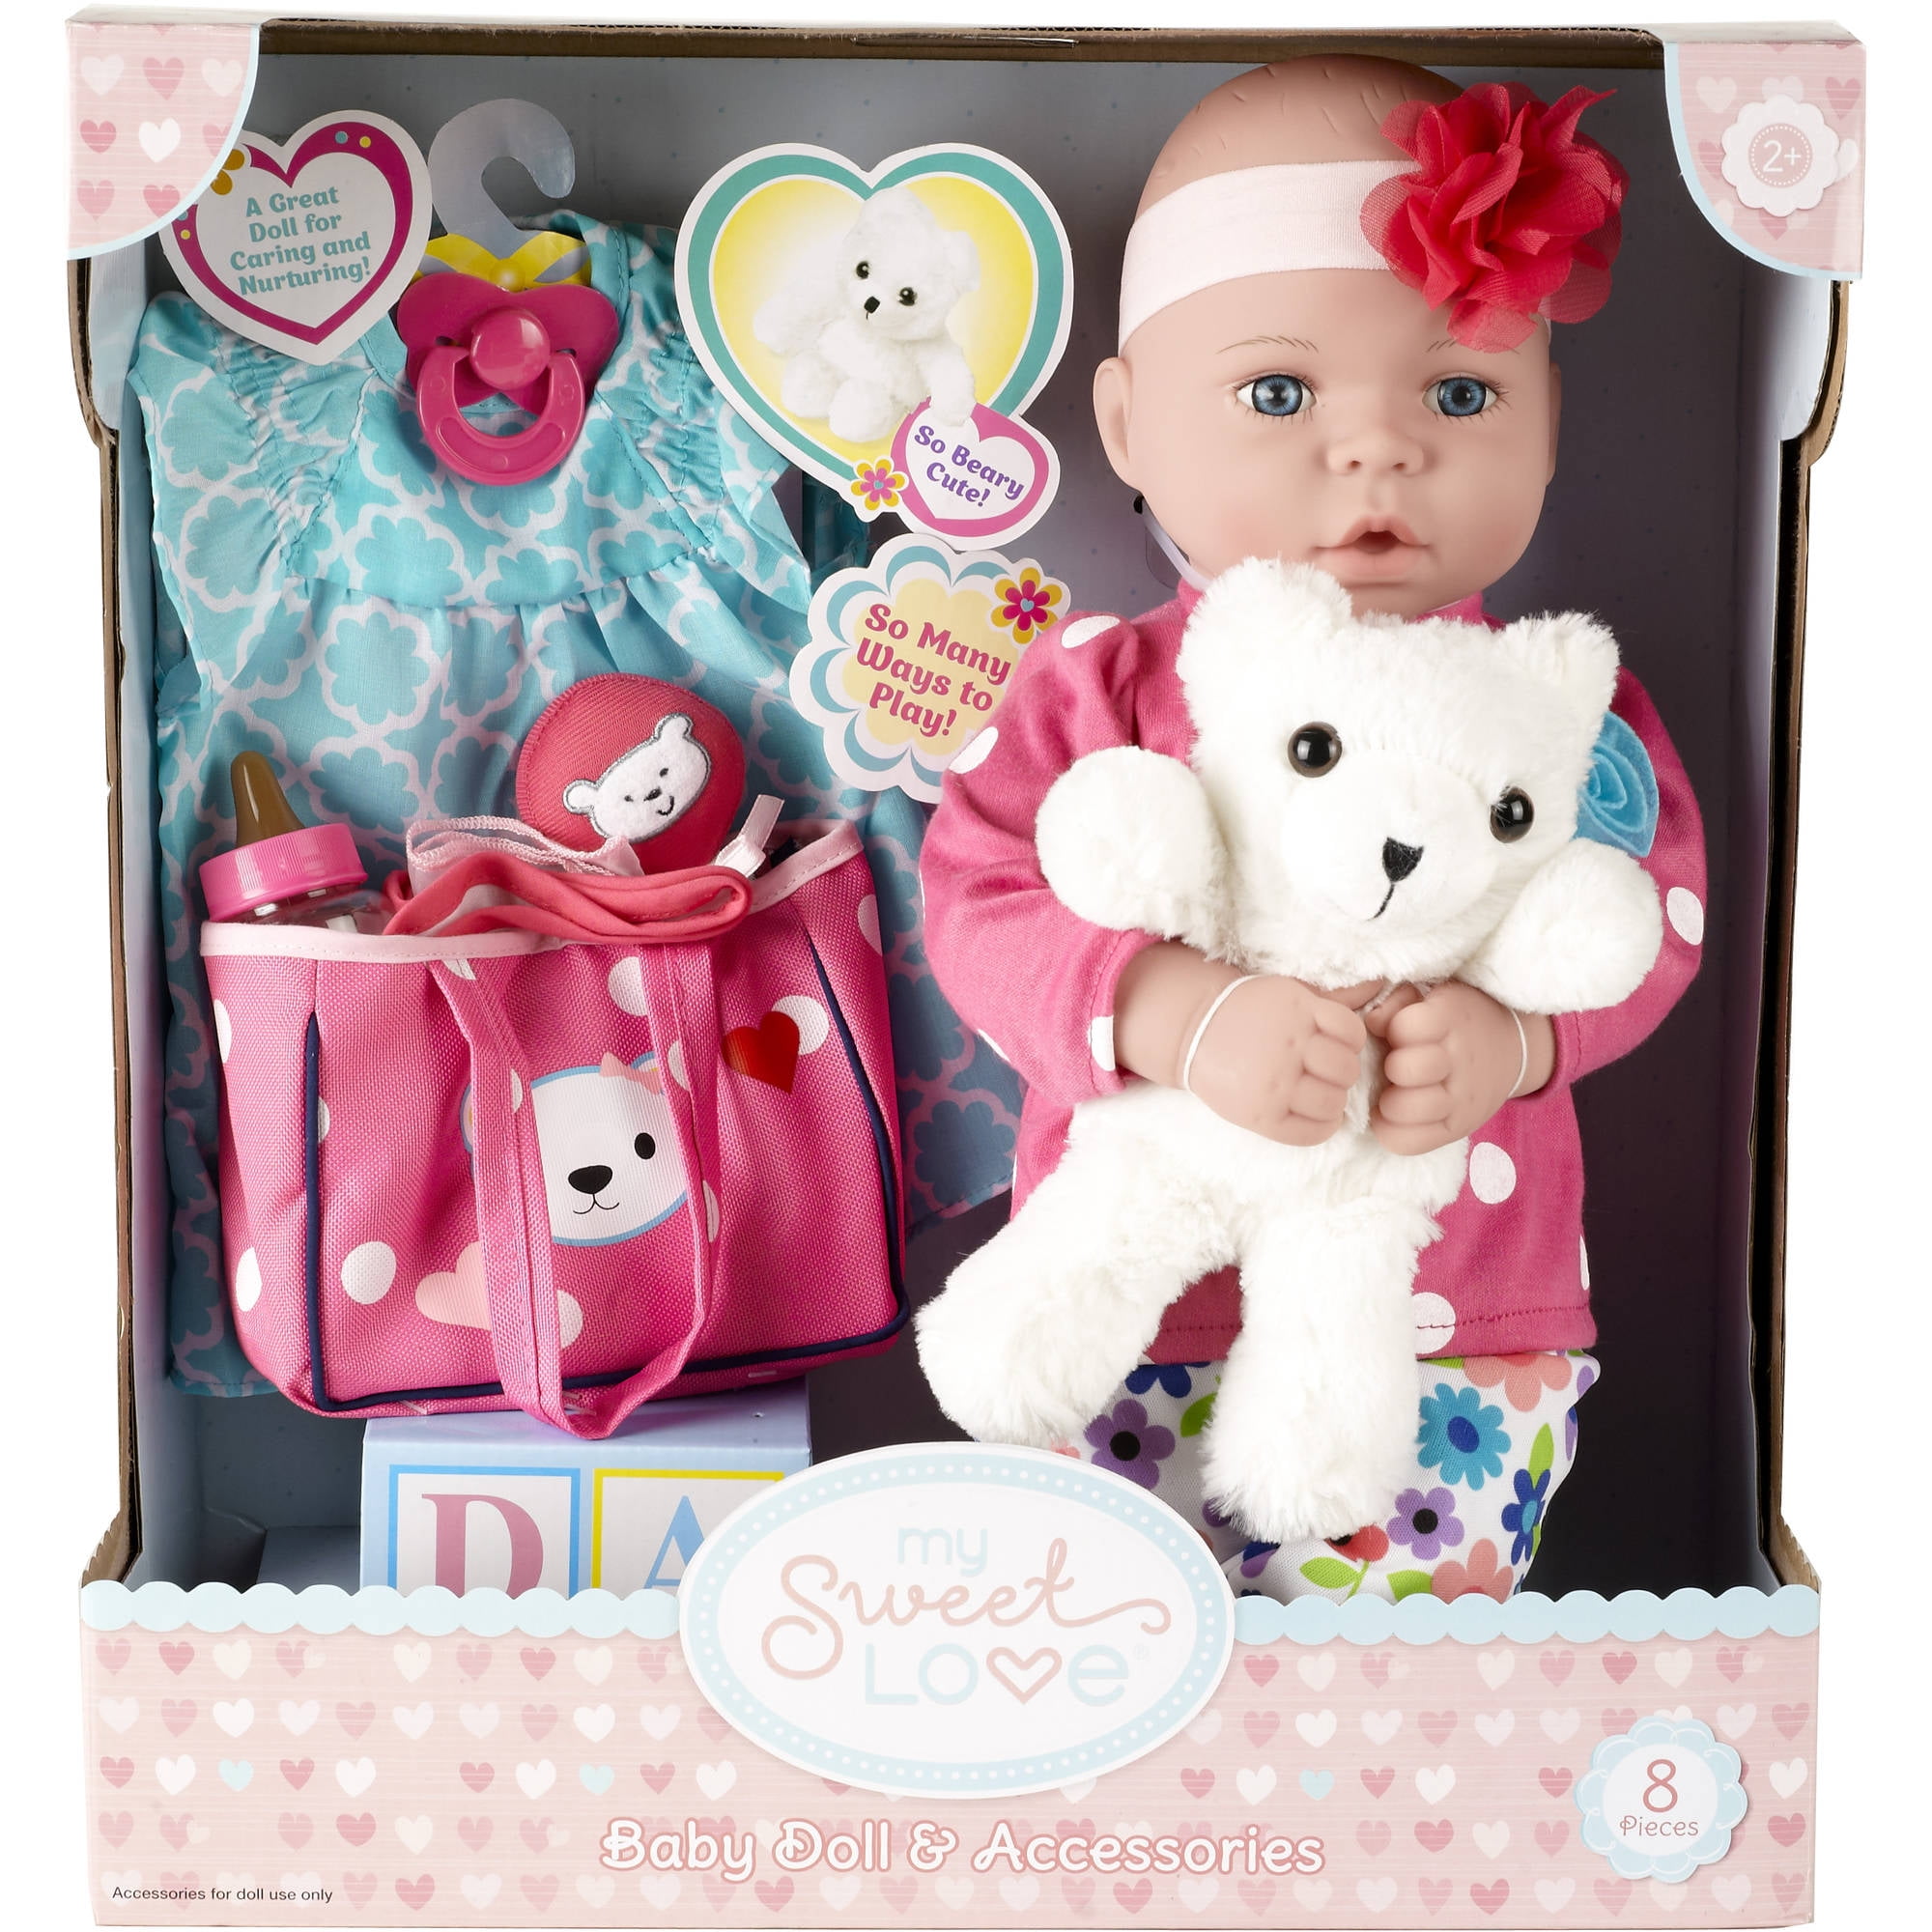 my sweet love baby doll and accessories